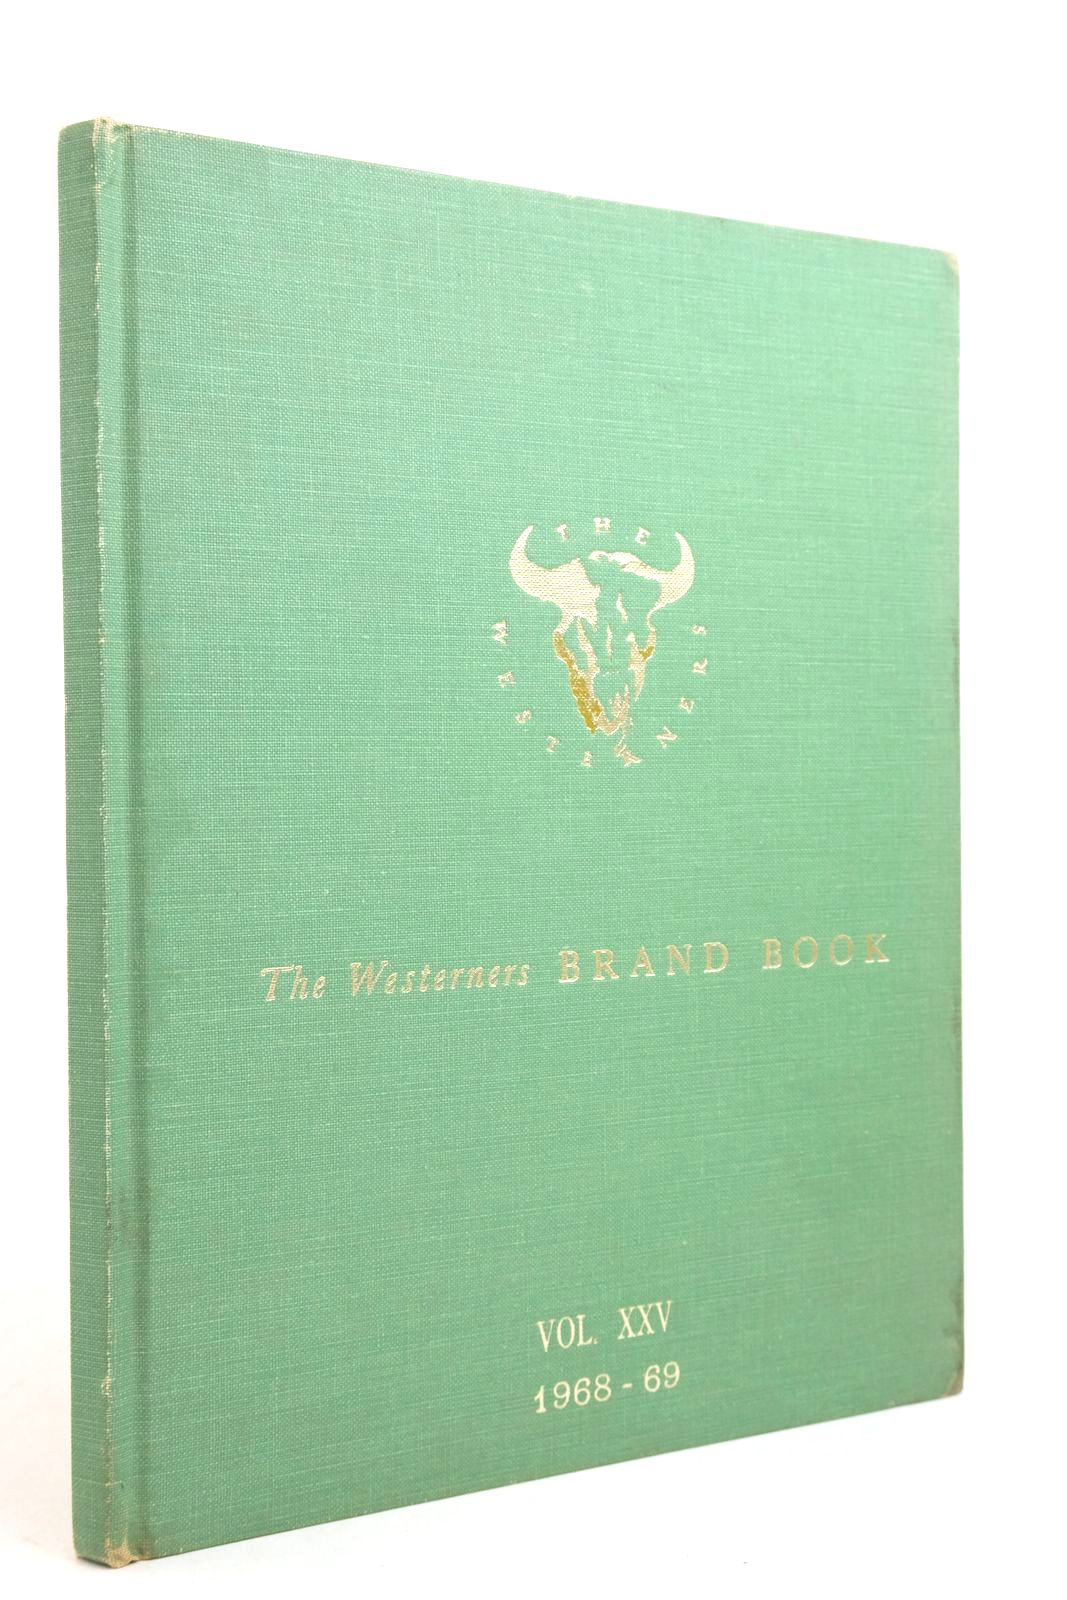 Photo of THE WESTERNERS BRAND BOOK VOLUME XXV MARCH 1968 TO FEBRUARY 1969 published by The Chicago Corral Of The Westerners (STOCK CODE: 2134829)  for sale by Stella & Rose's Books